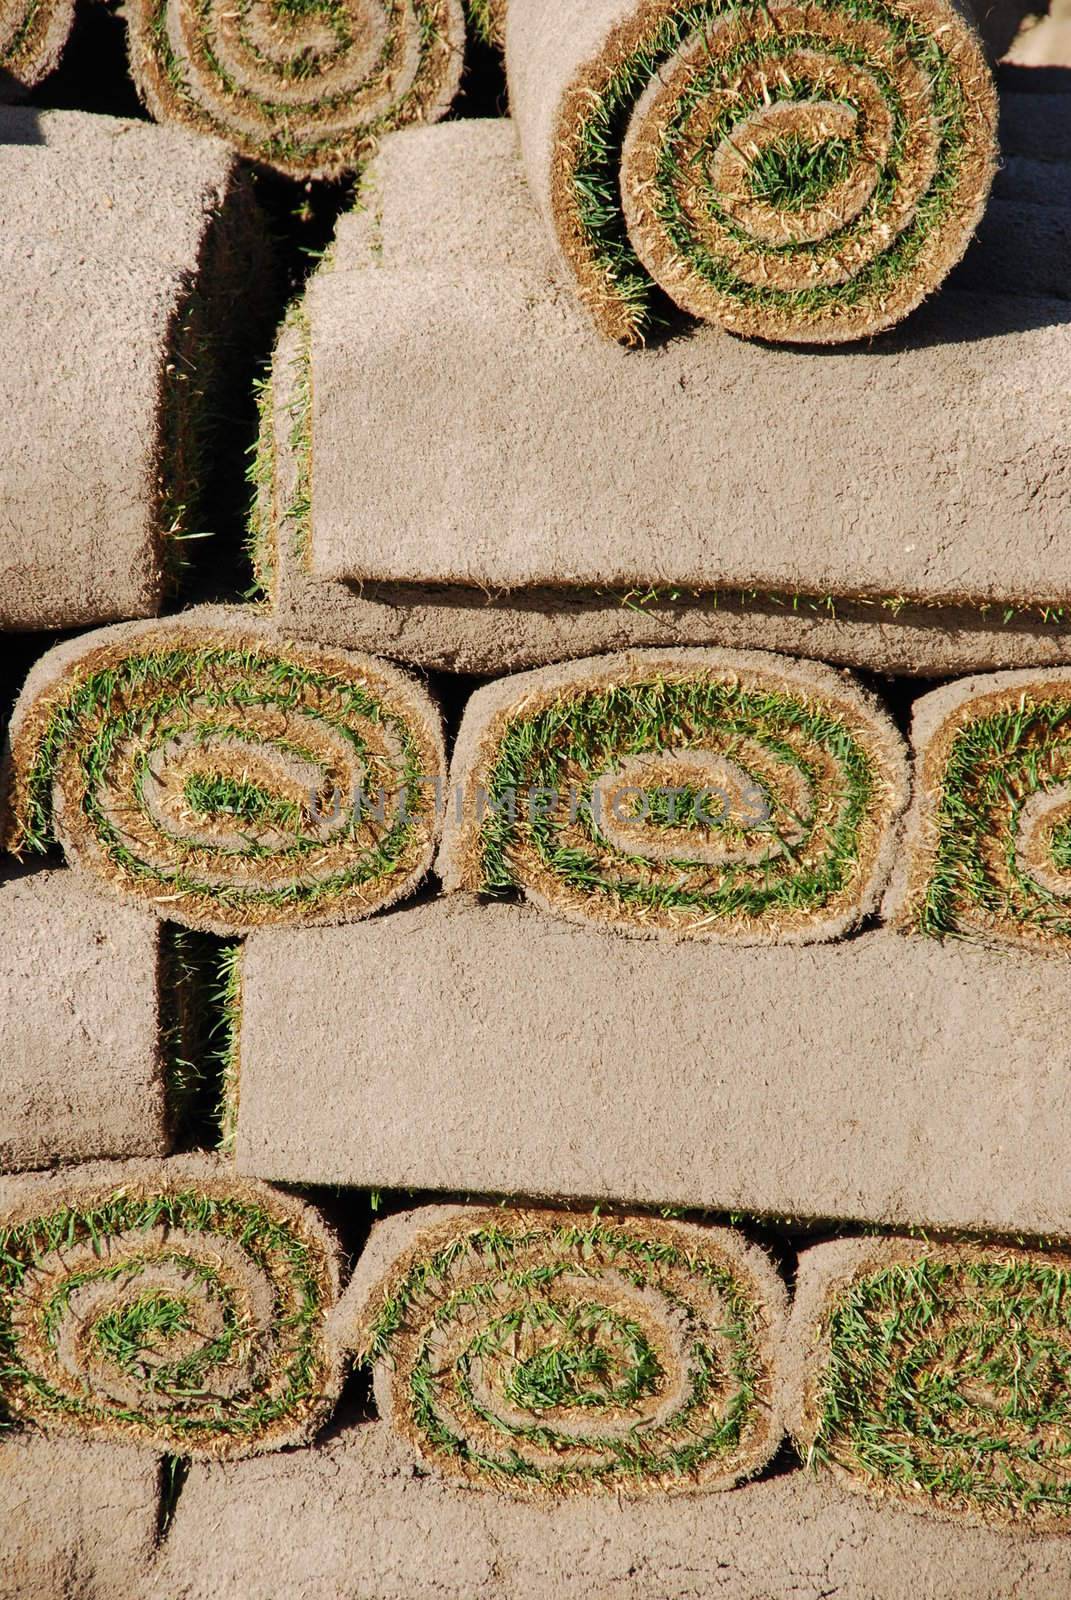 Rolls of sod (background) by luissantos84